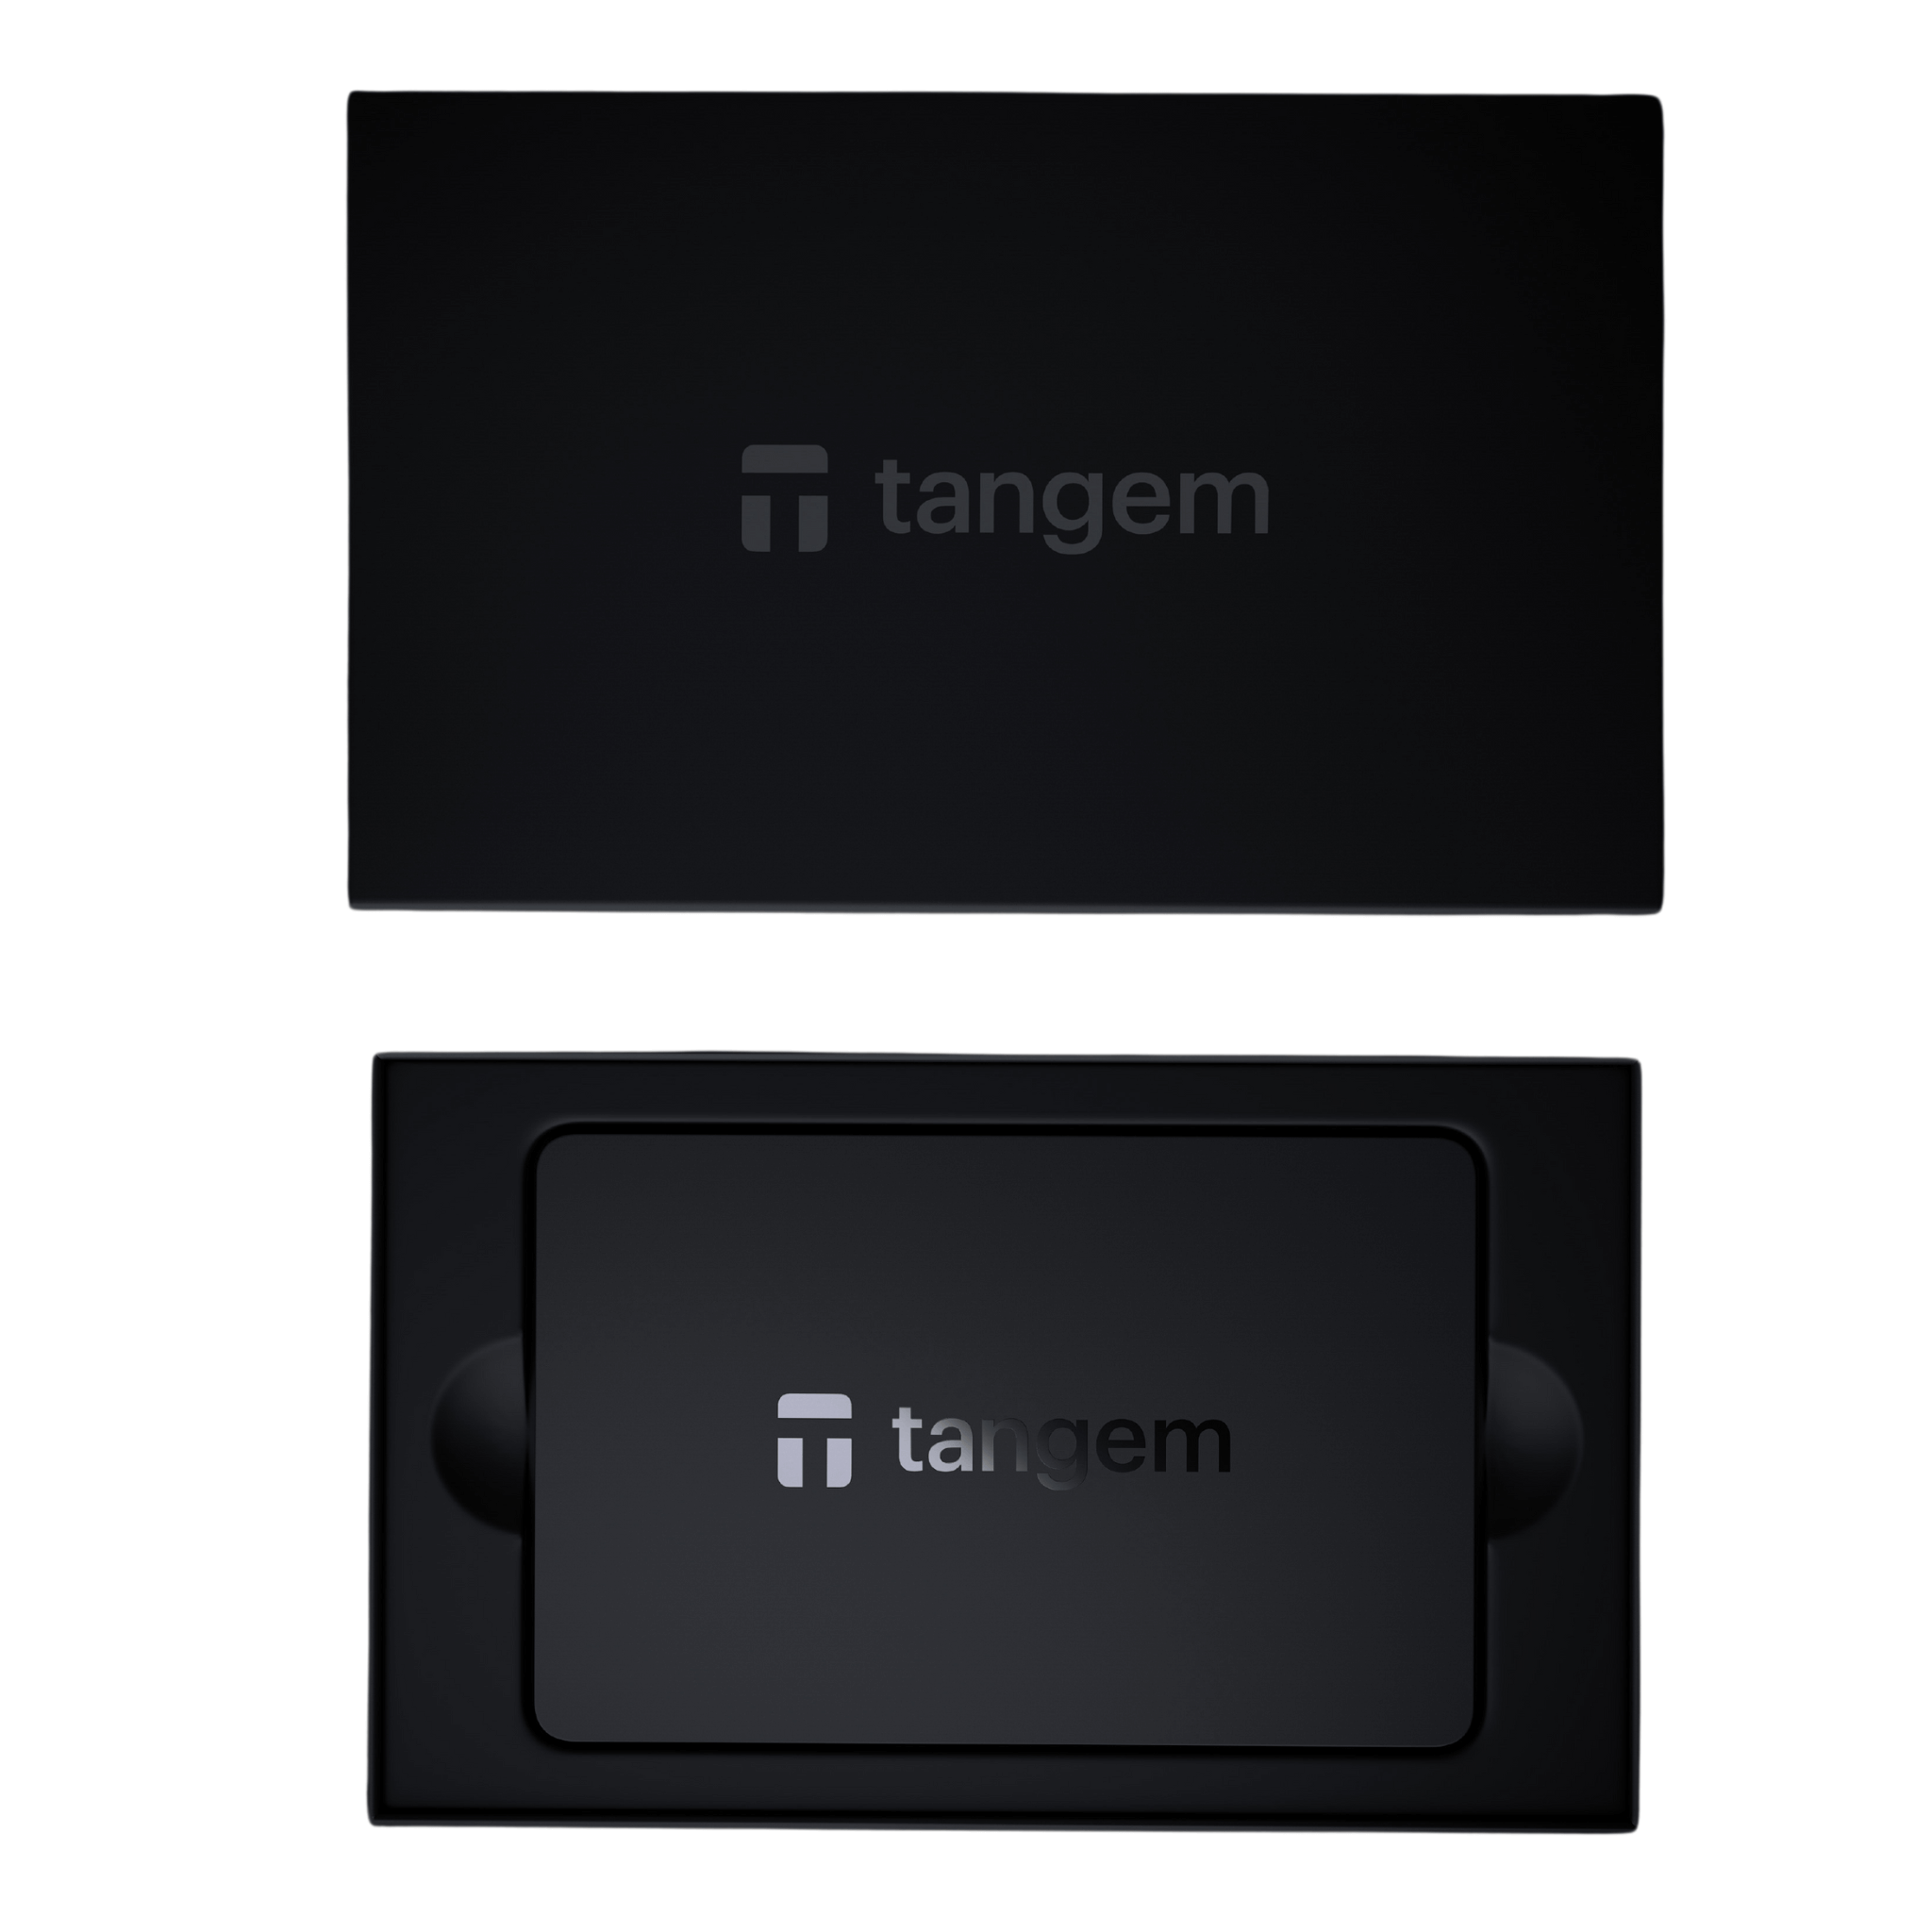 Tangem Wallet 2.0 2 Card Cryptocurrency Hardware Wallet Package Contents